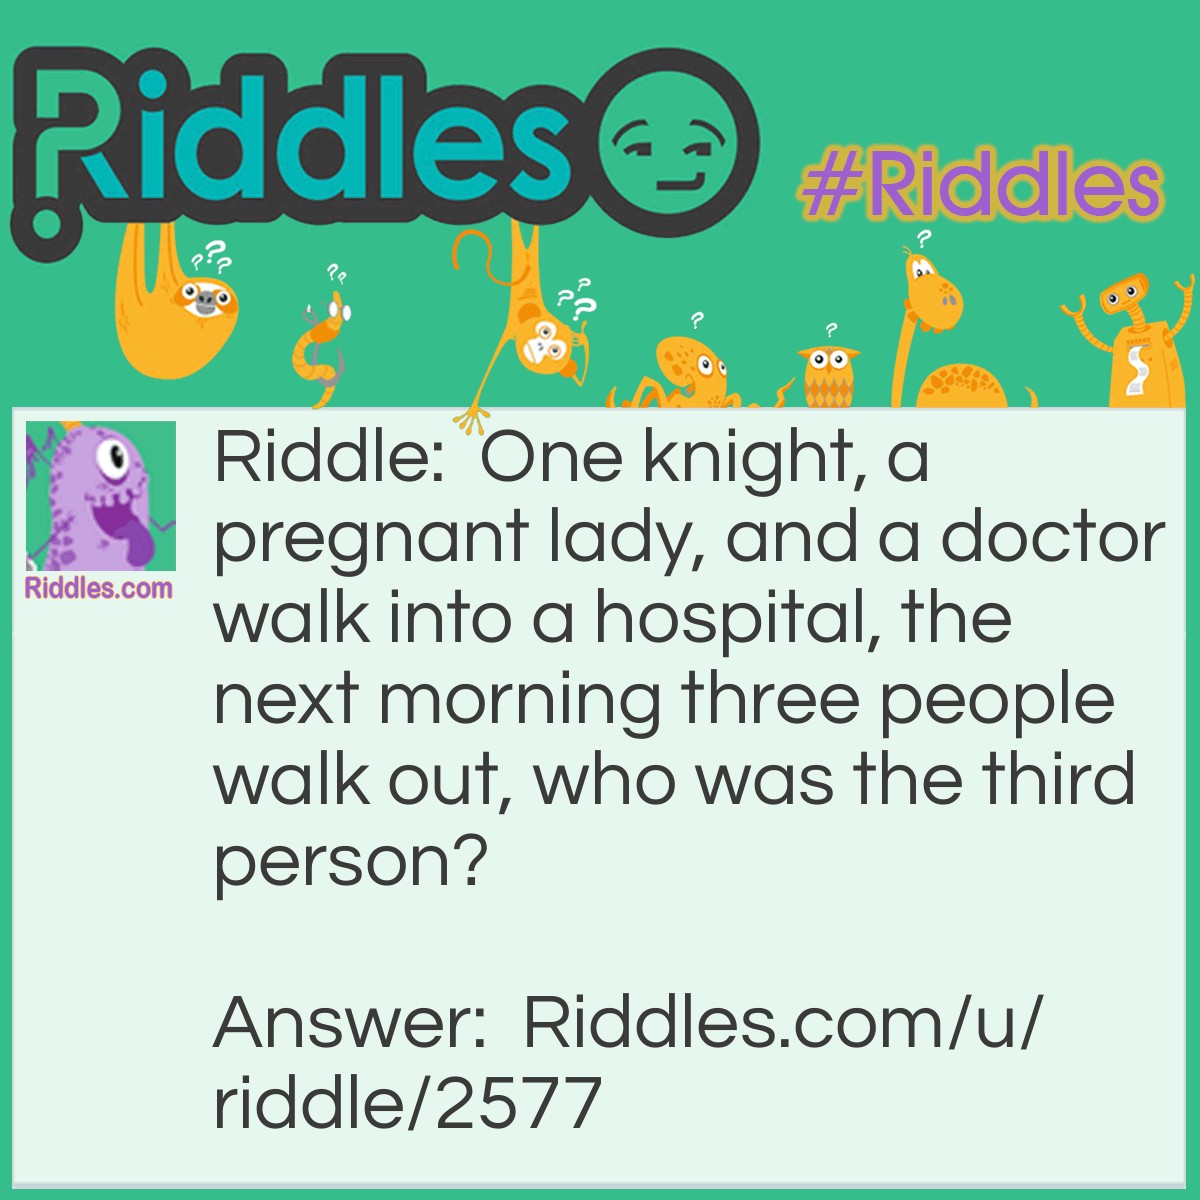 Riddle: One knight, a pregnant lady, and a doctor walk into a hospital, the next morning three people walk out, who was the third person? Answer: The knight.